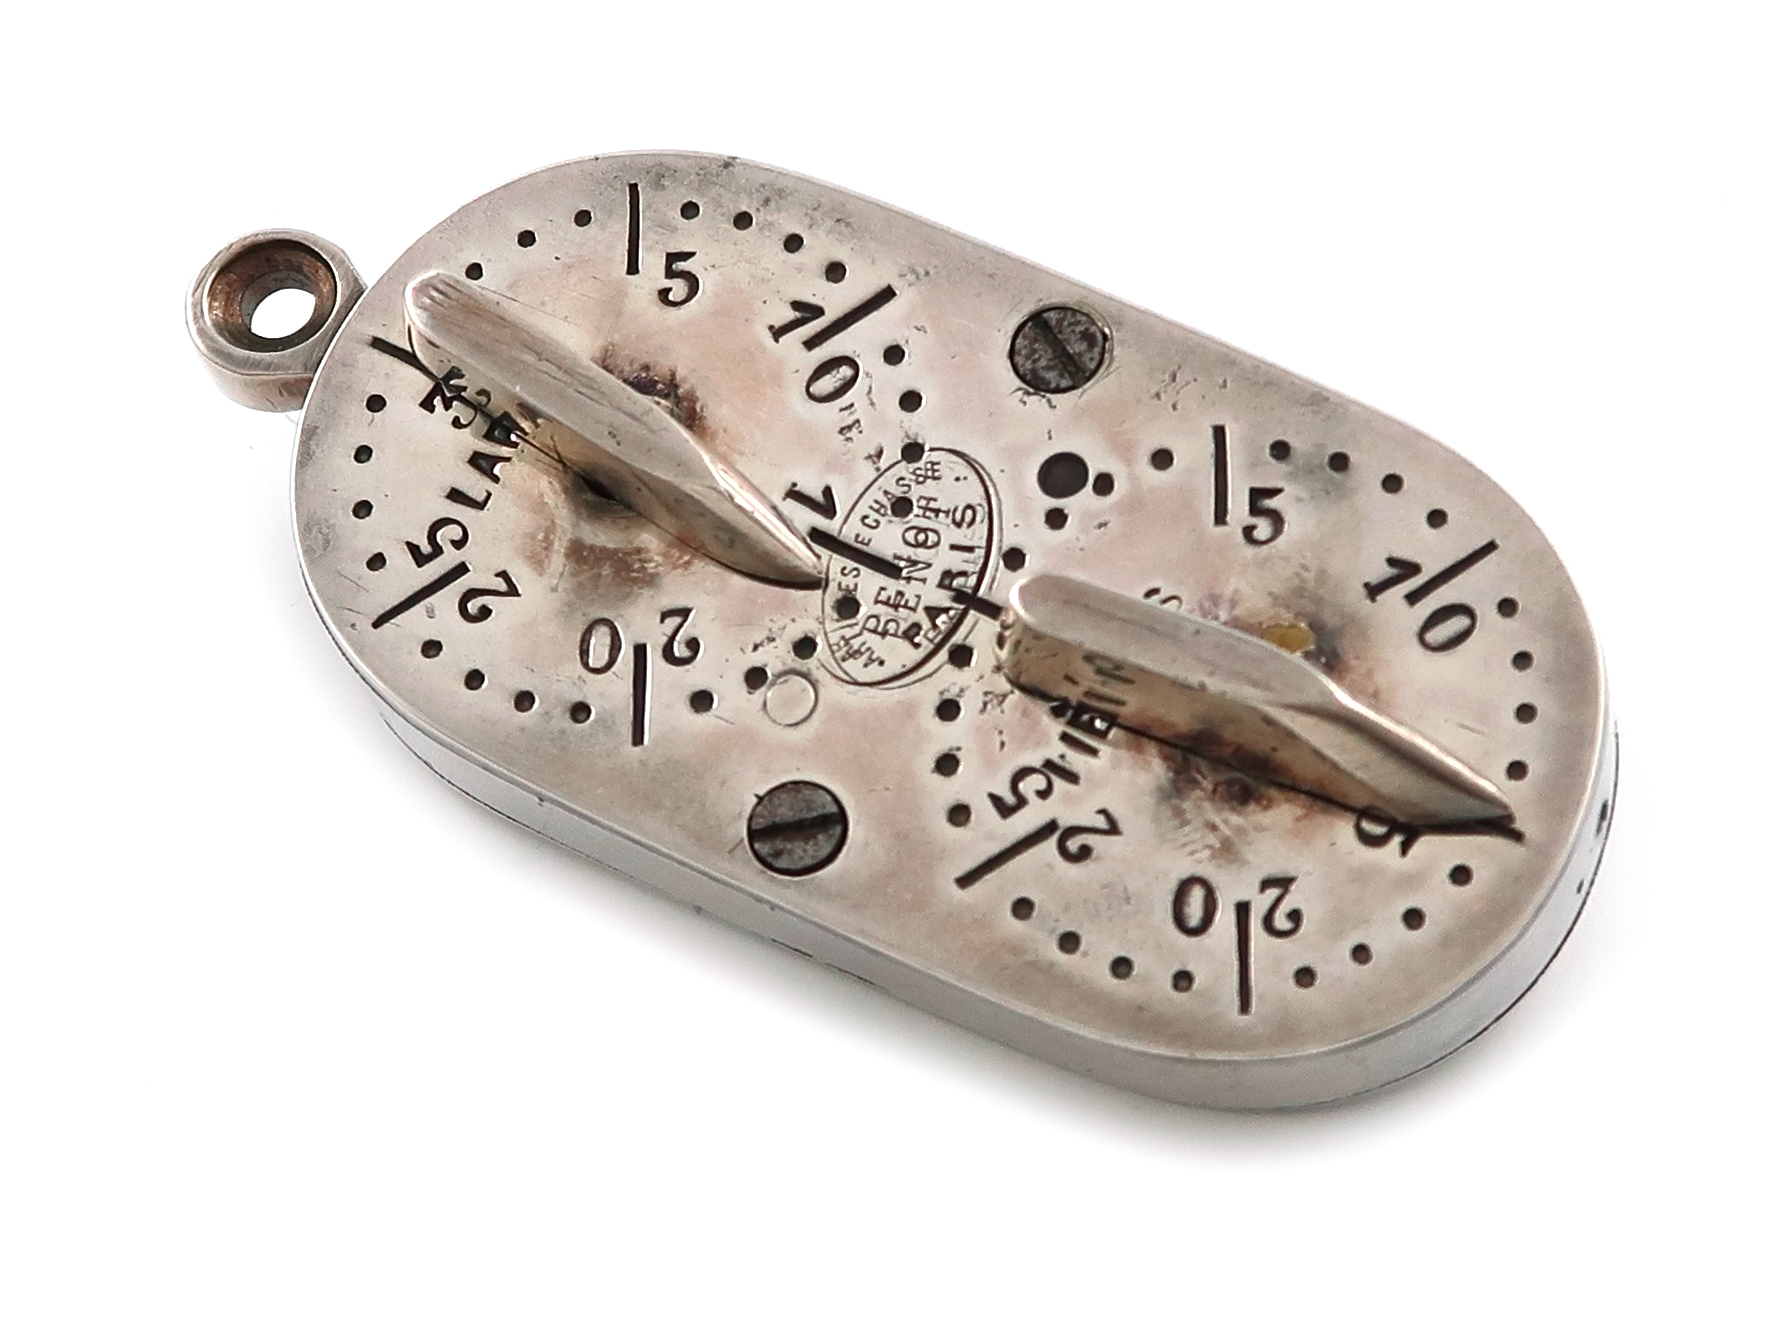 A French electroplated game counter, by Penot, Paris, circa 1900, oblong form, with four dials for